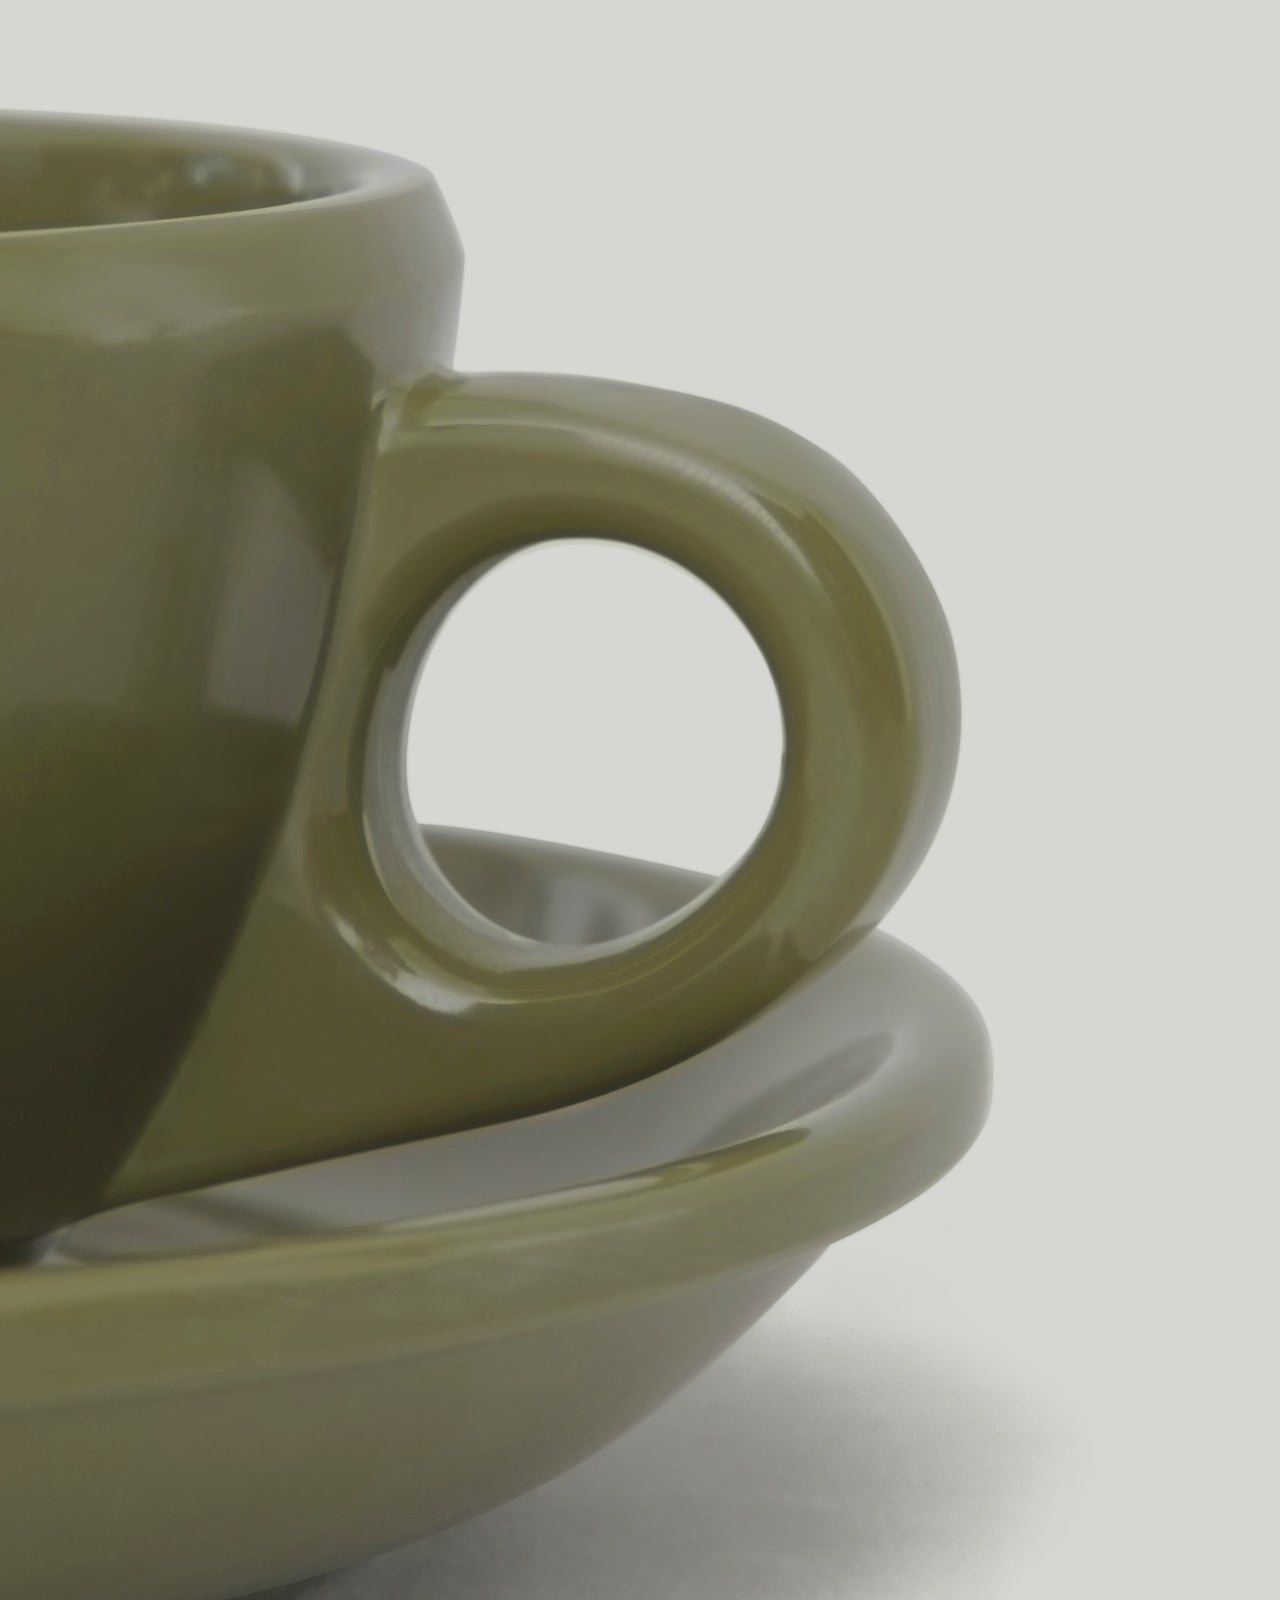 Coffee Cup With Saucer